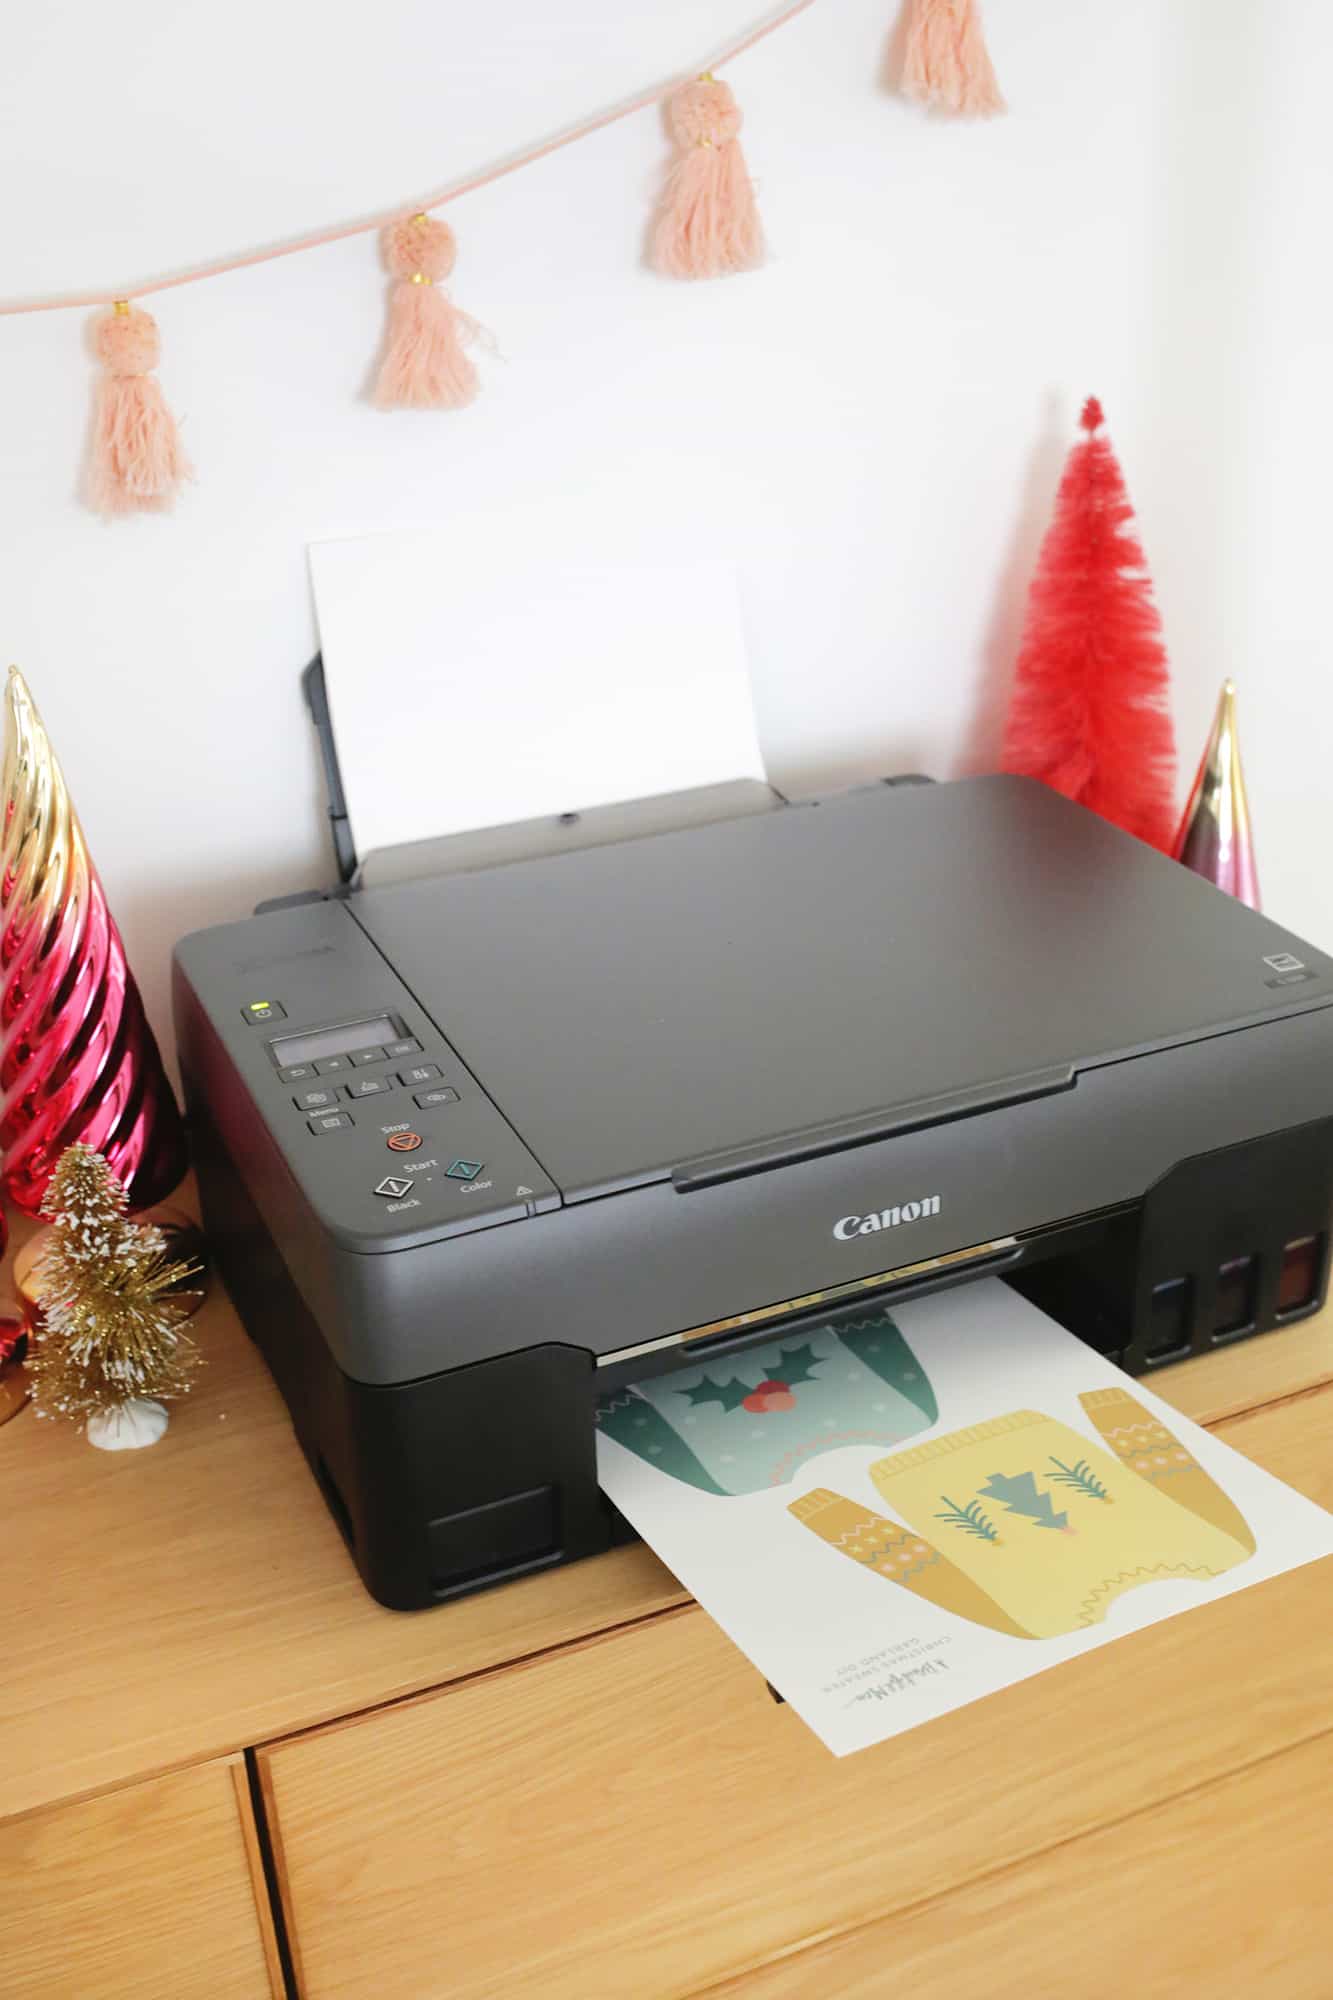 printer printing images of chistmas sweaters on paper with Christmas decor around the printer